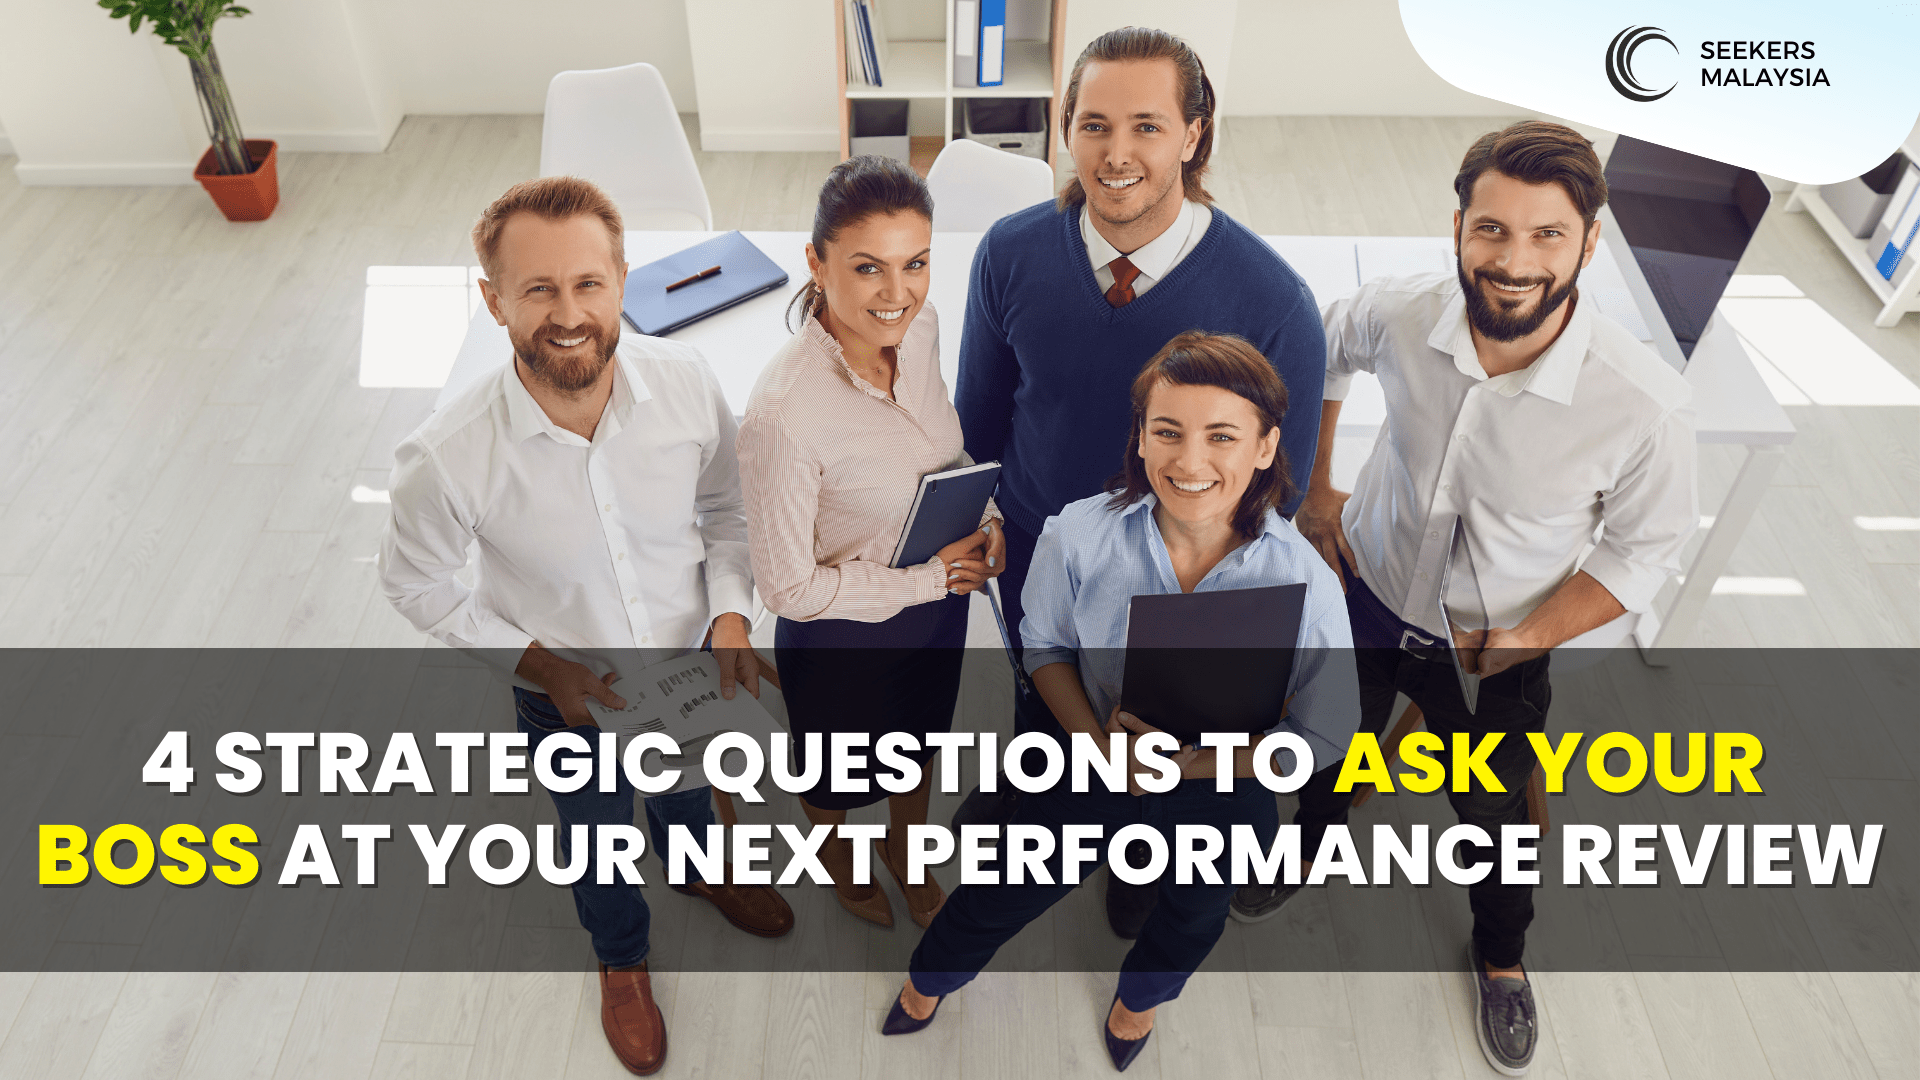 4 Strategic Questions to Ask Your Boss at Your Next Performance Review